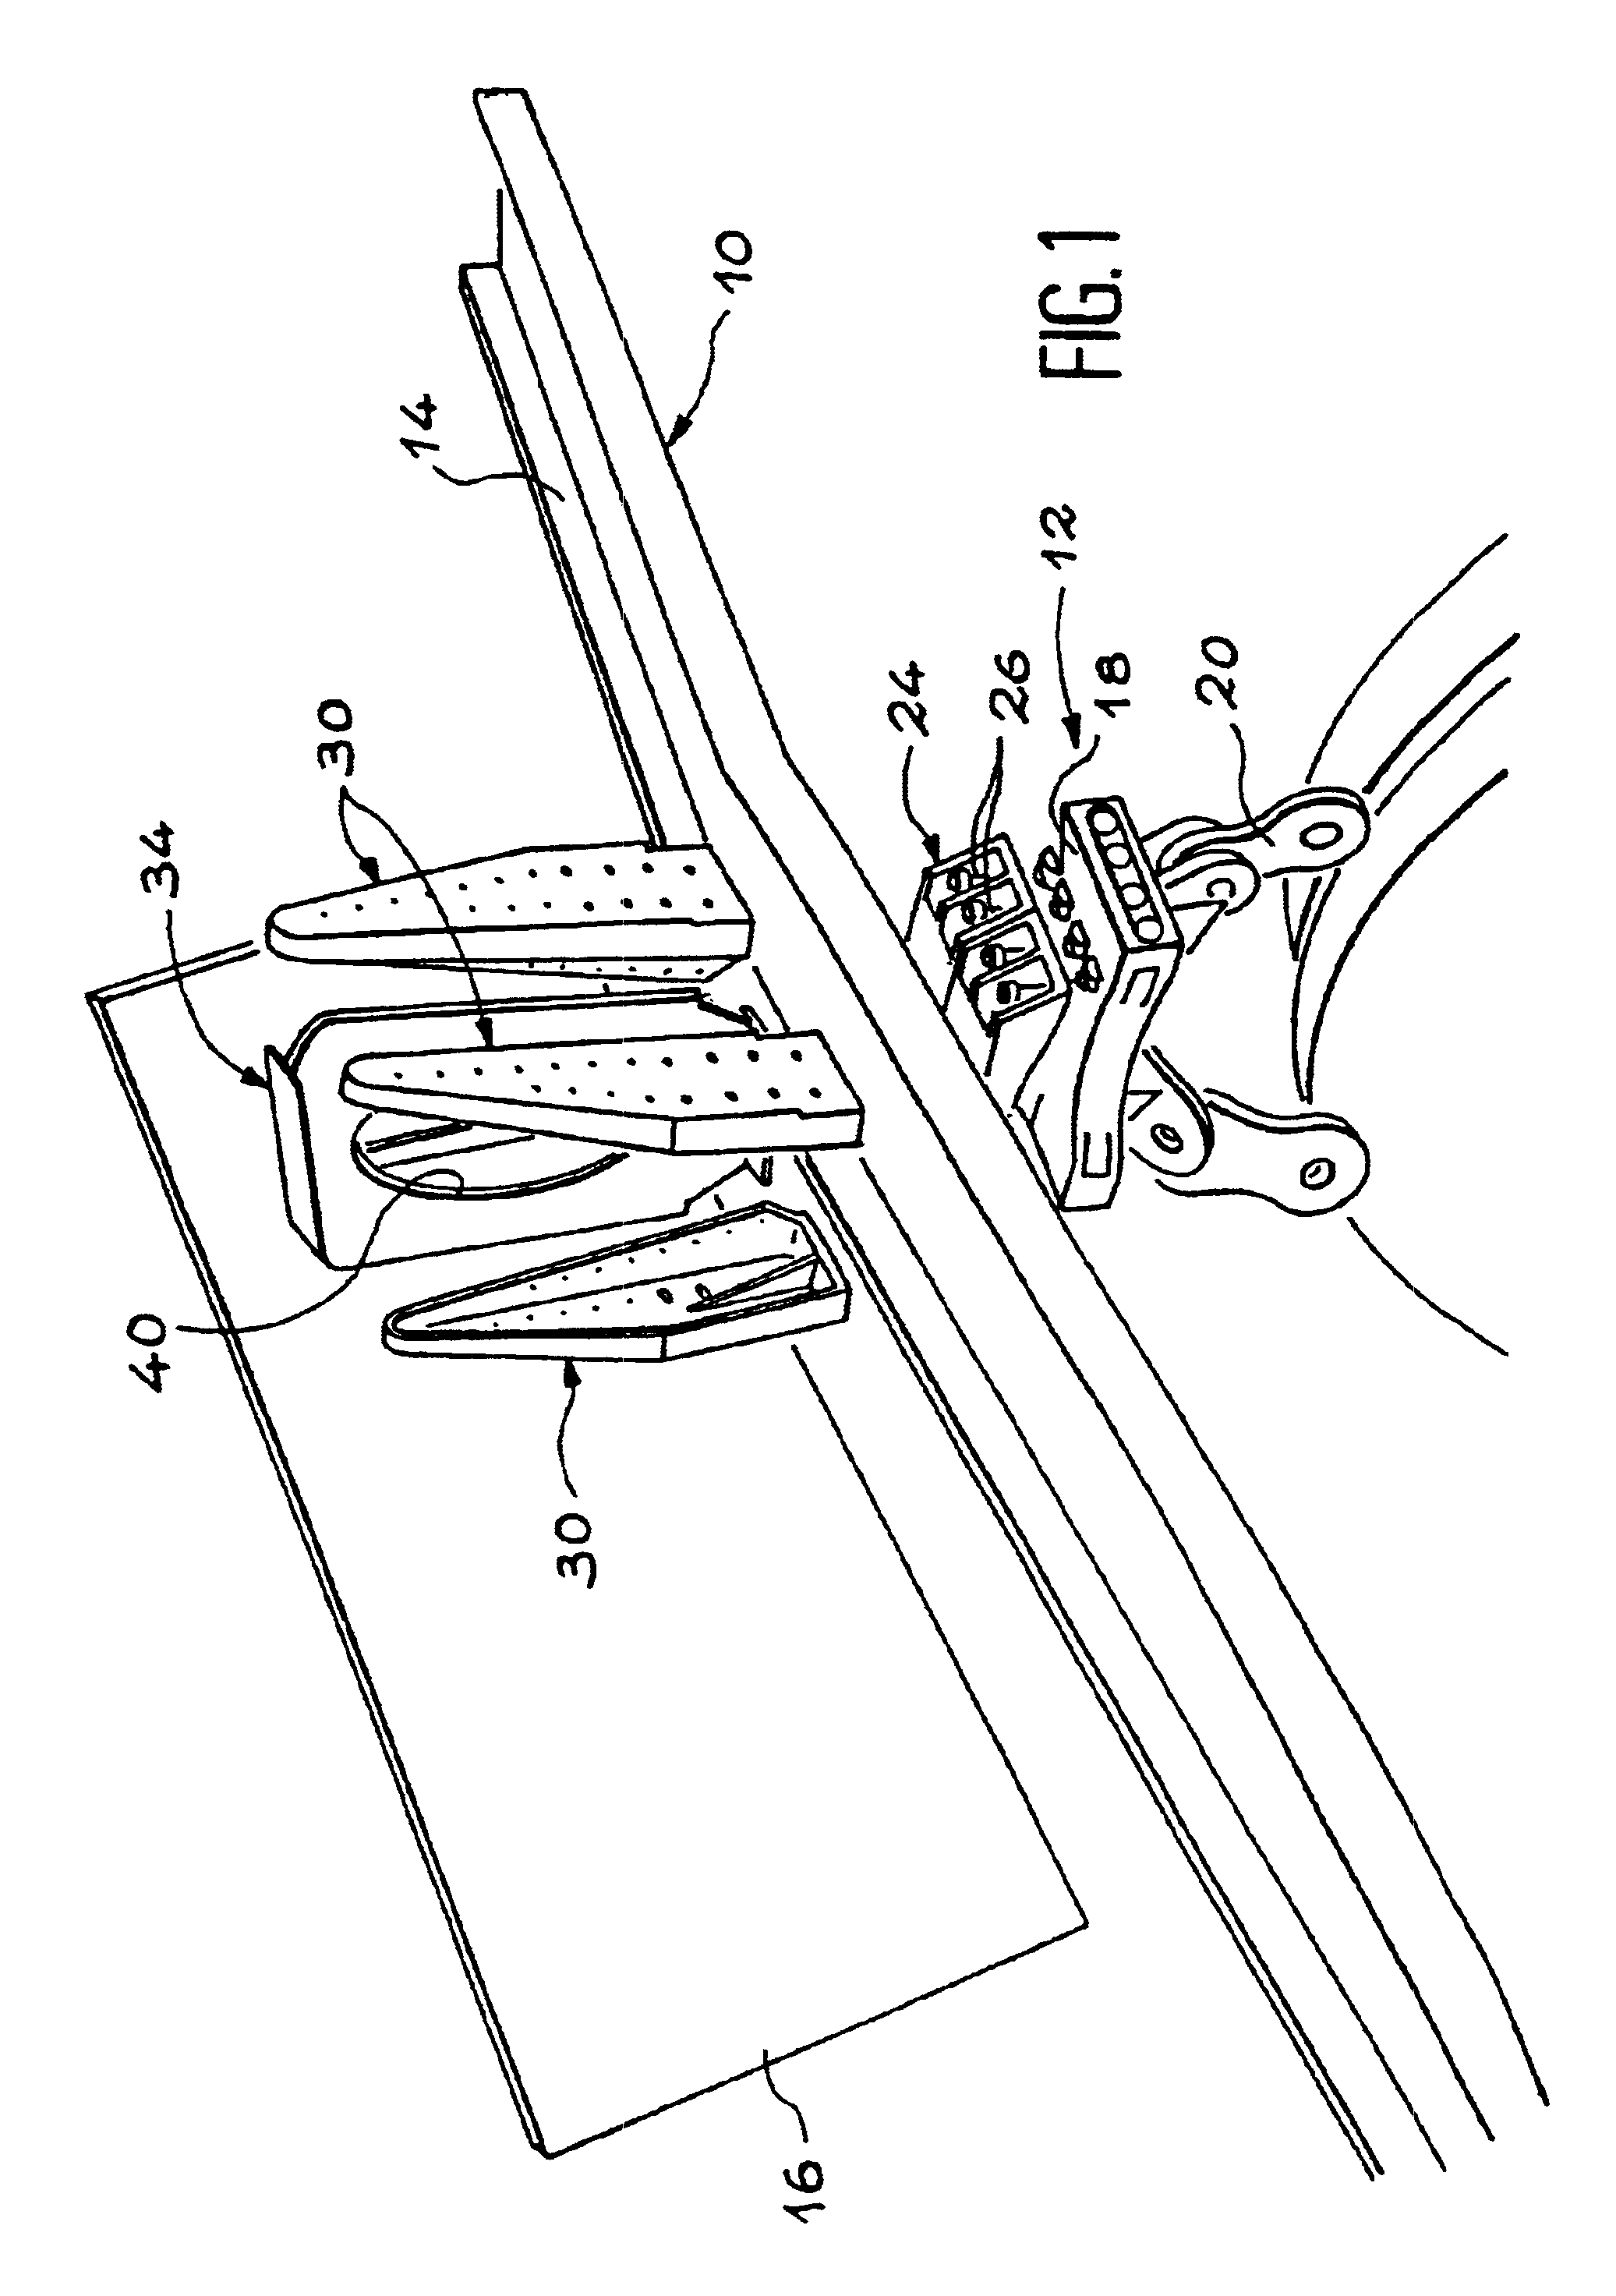 Device for recovery of forces generated by an aircraft engine